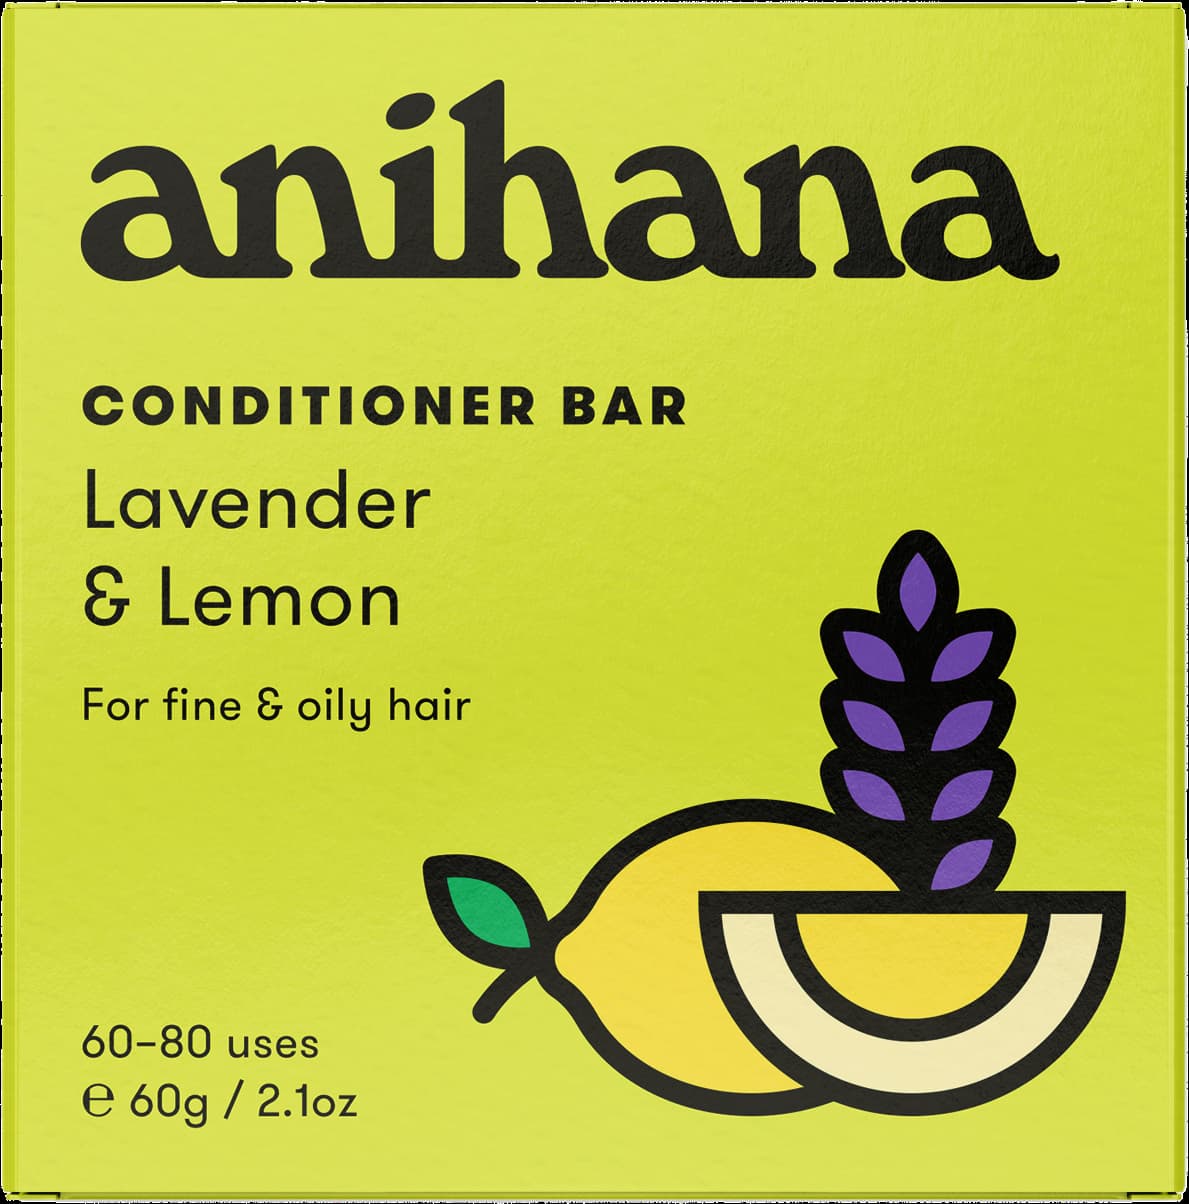 Anihana-conditioner-bar-lavender-and-lemon-fine-and-oily-hair-60g